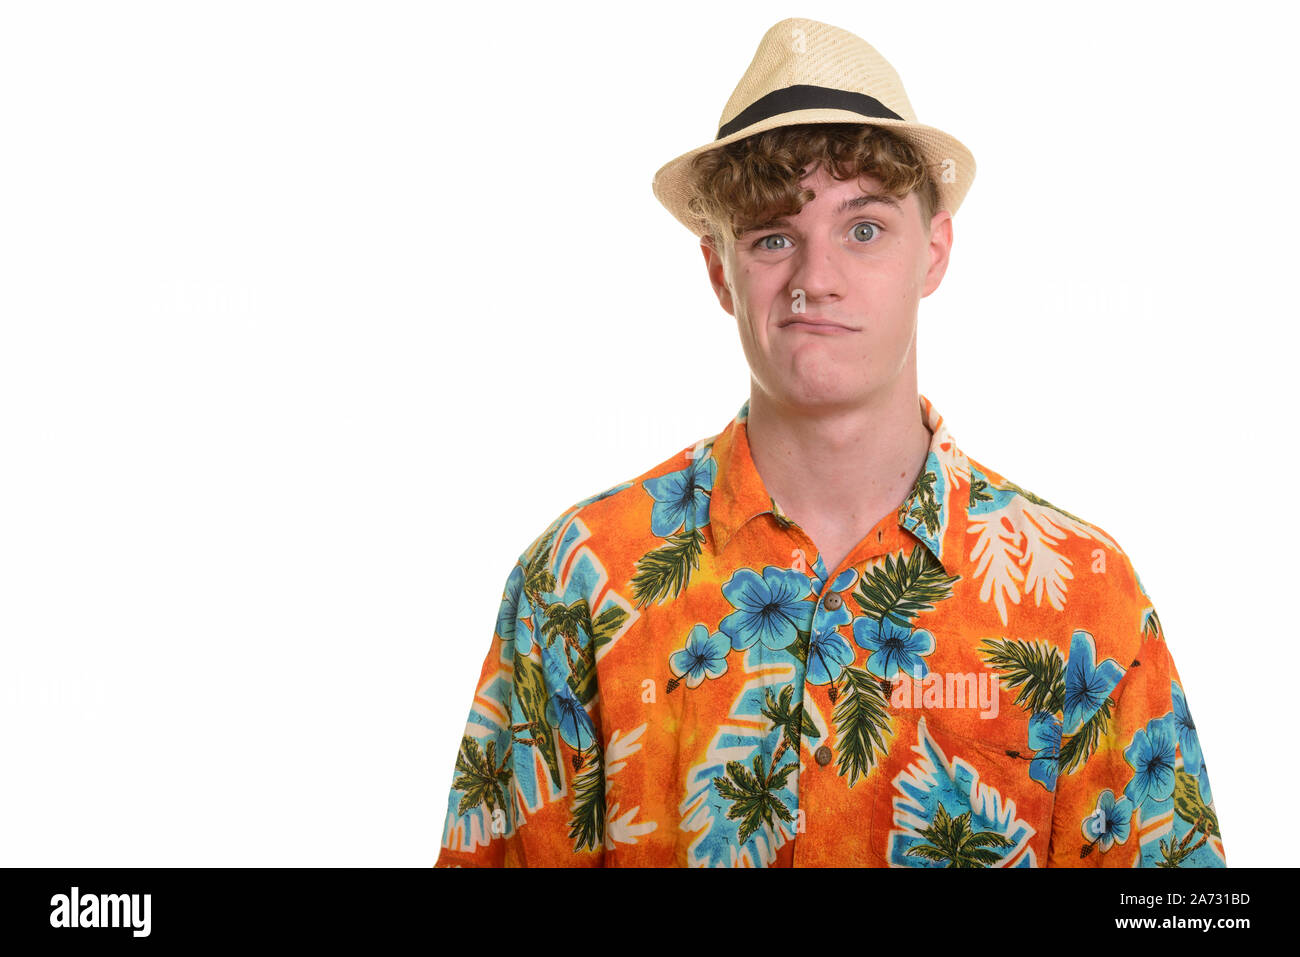 Stressed young tourist man with hat looking upset for vacation Stock Photo